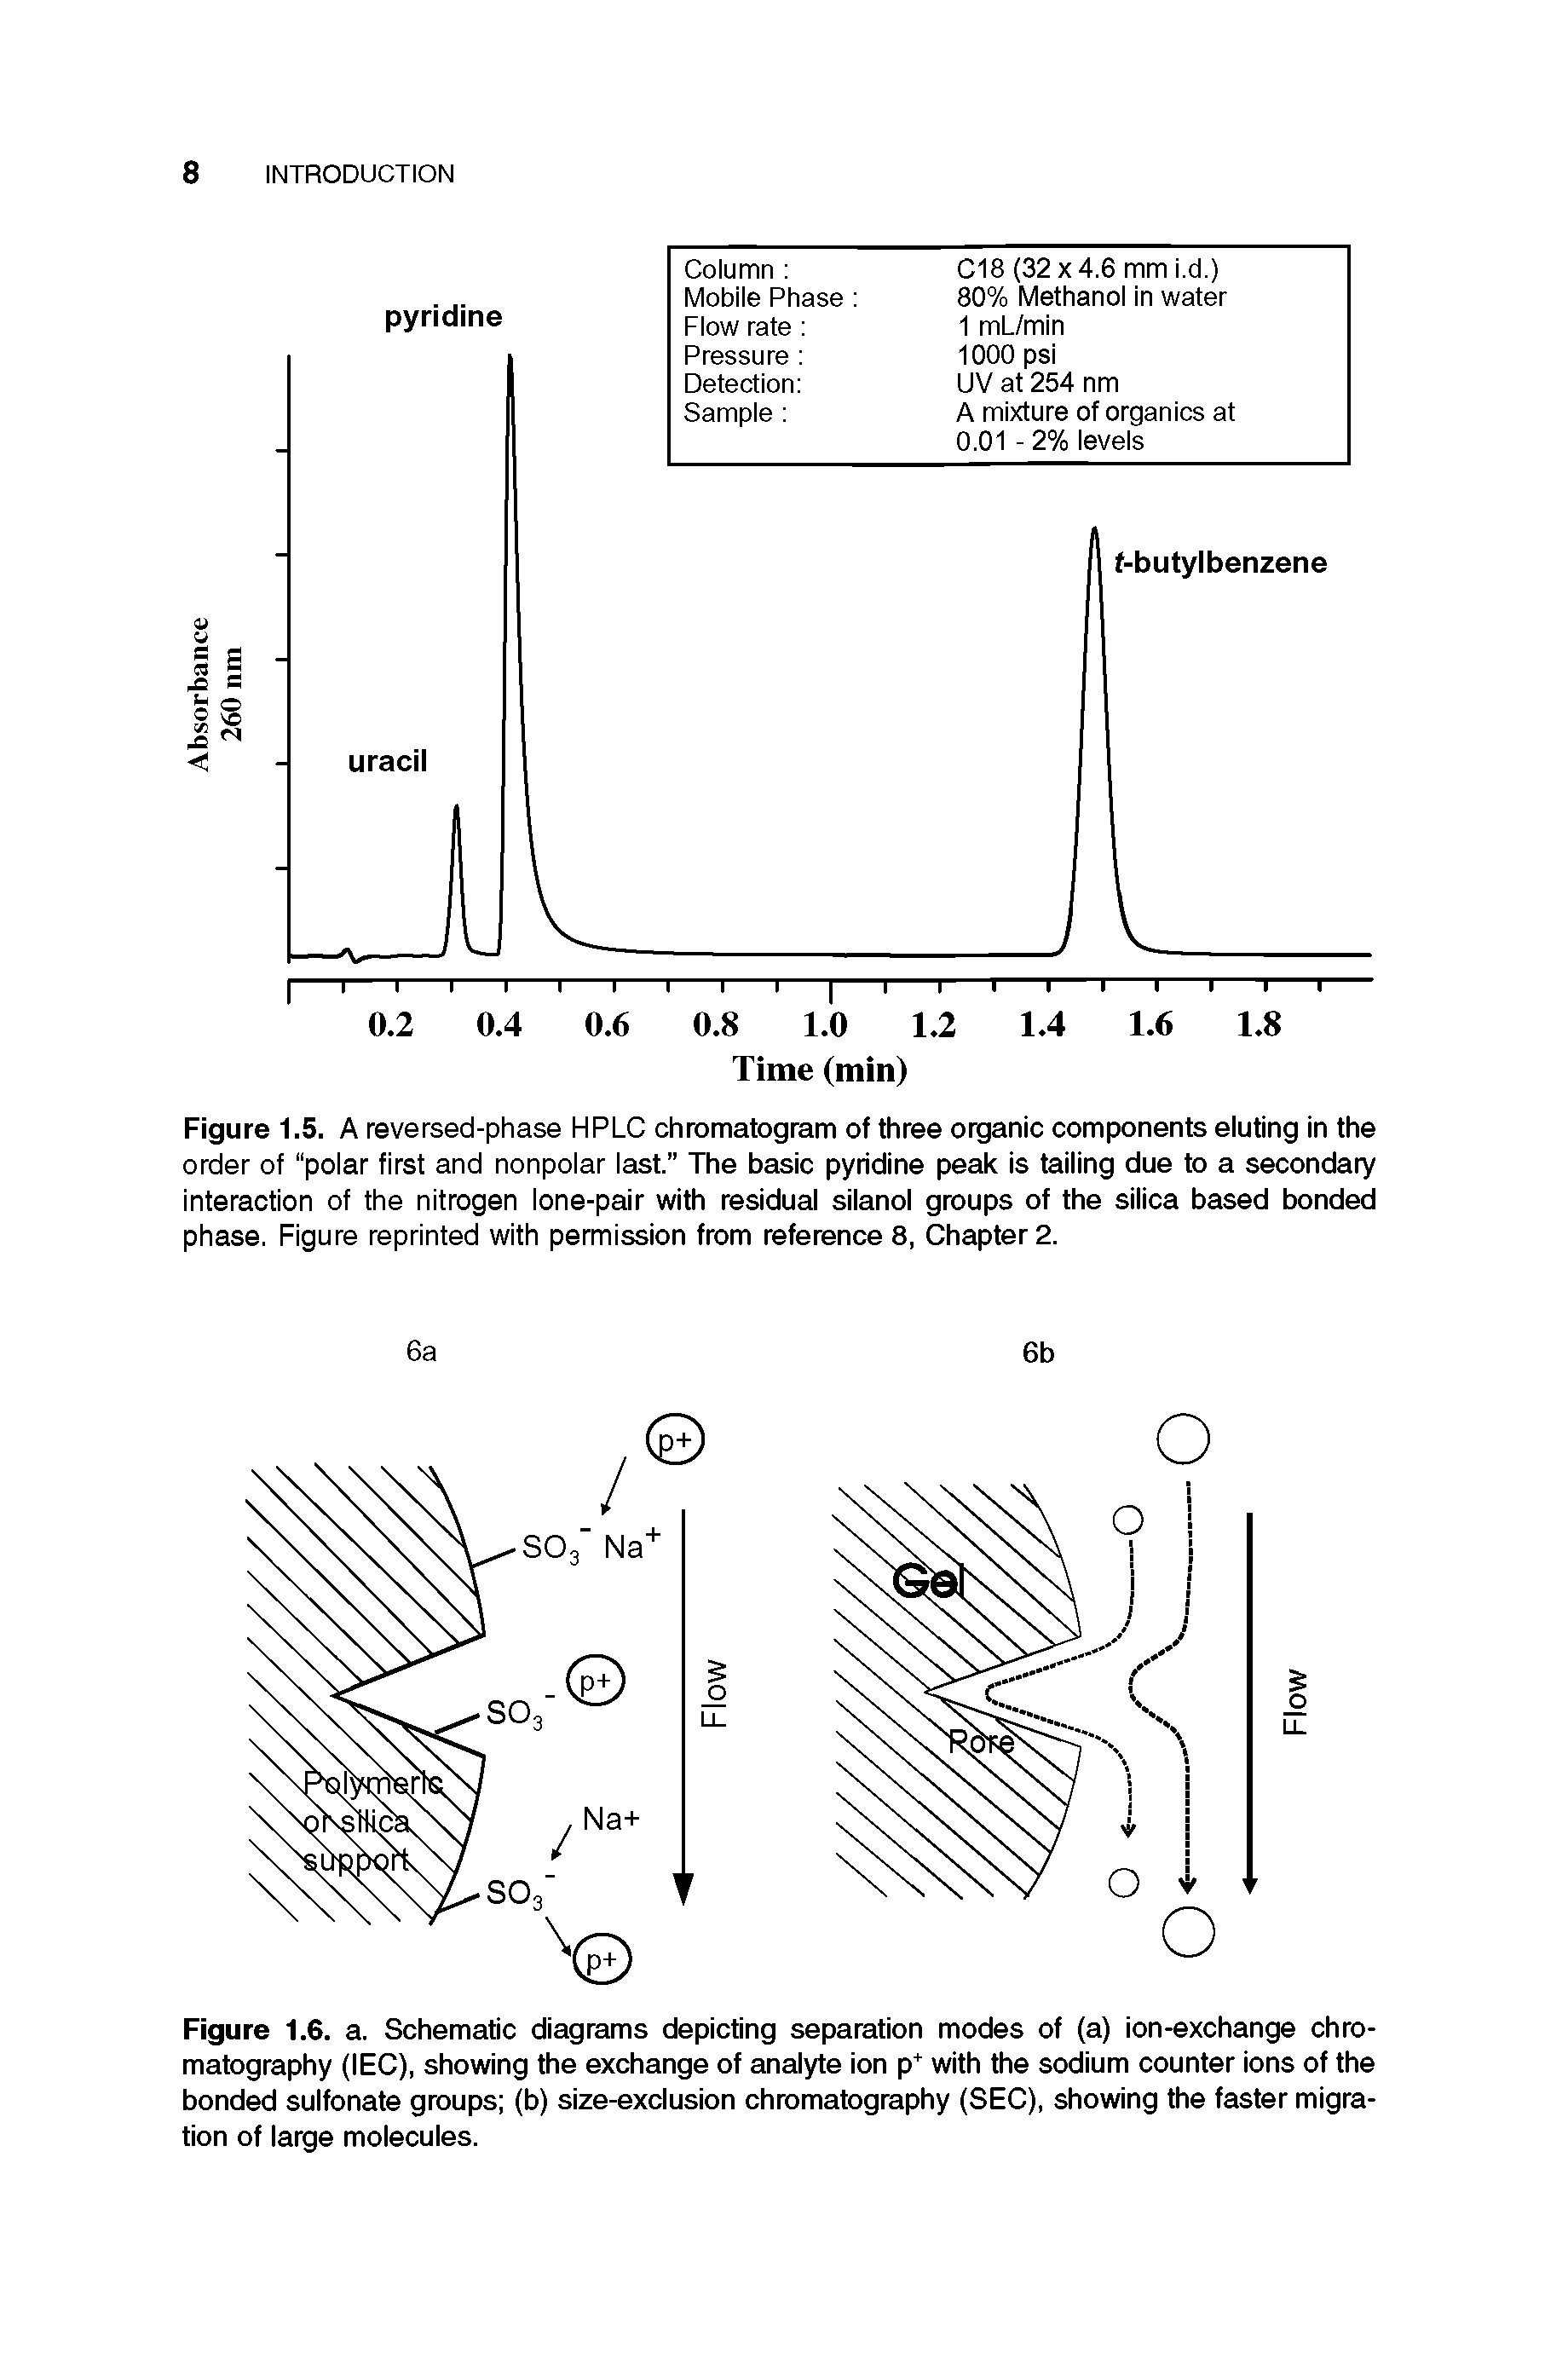 Figure 1.5. A reversed-phase HPLC chromatogram of three organic components eluting in the order of polar first and nonpolar last. The basic pyridine peak is tailing due to a secondary interaction of the nitrogen lone-pair with residual silanol groups of the silica based bonded phase. Figure reprinted with permission from reference 8, Chapter 2.